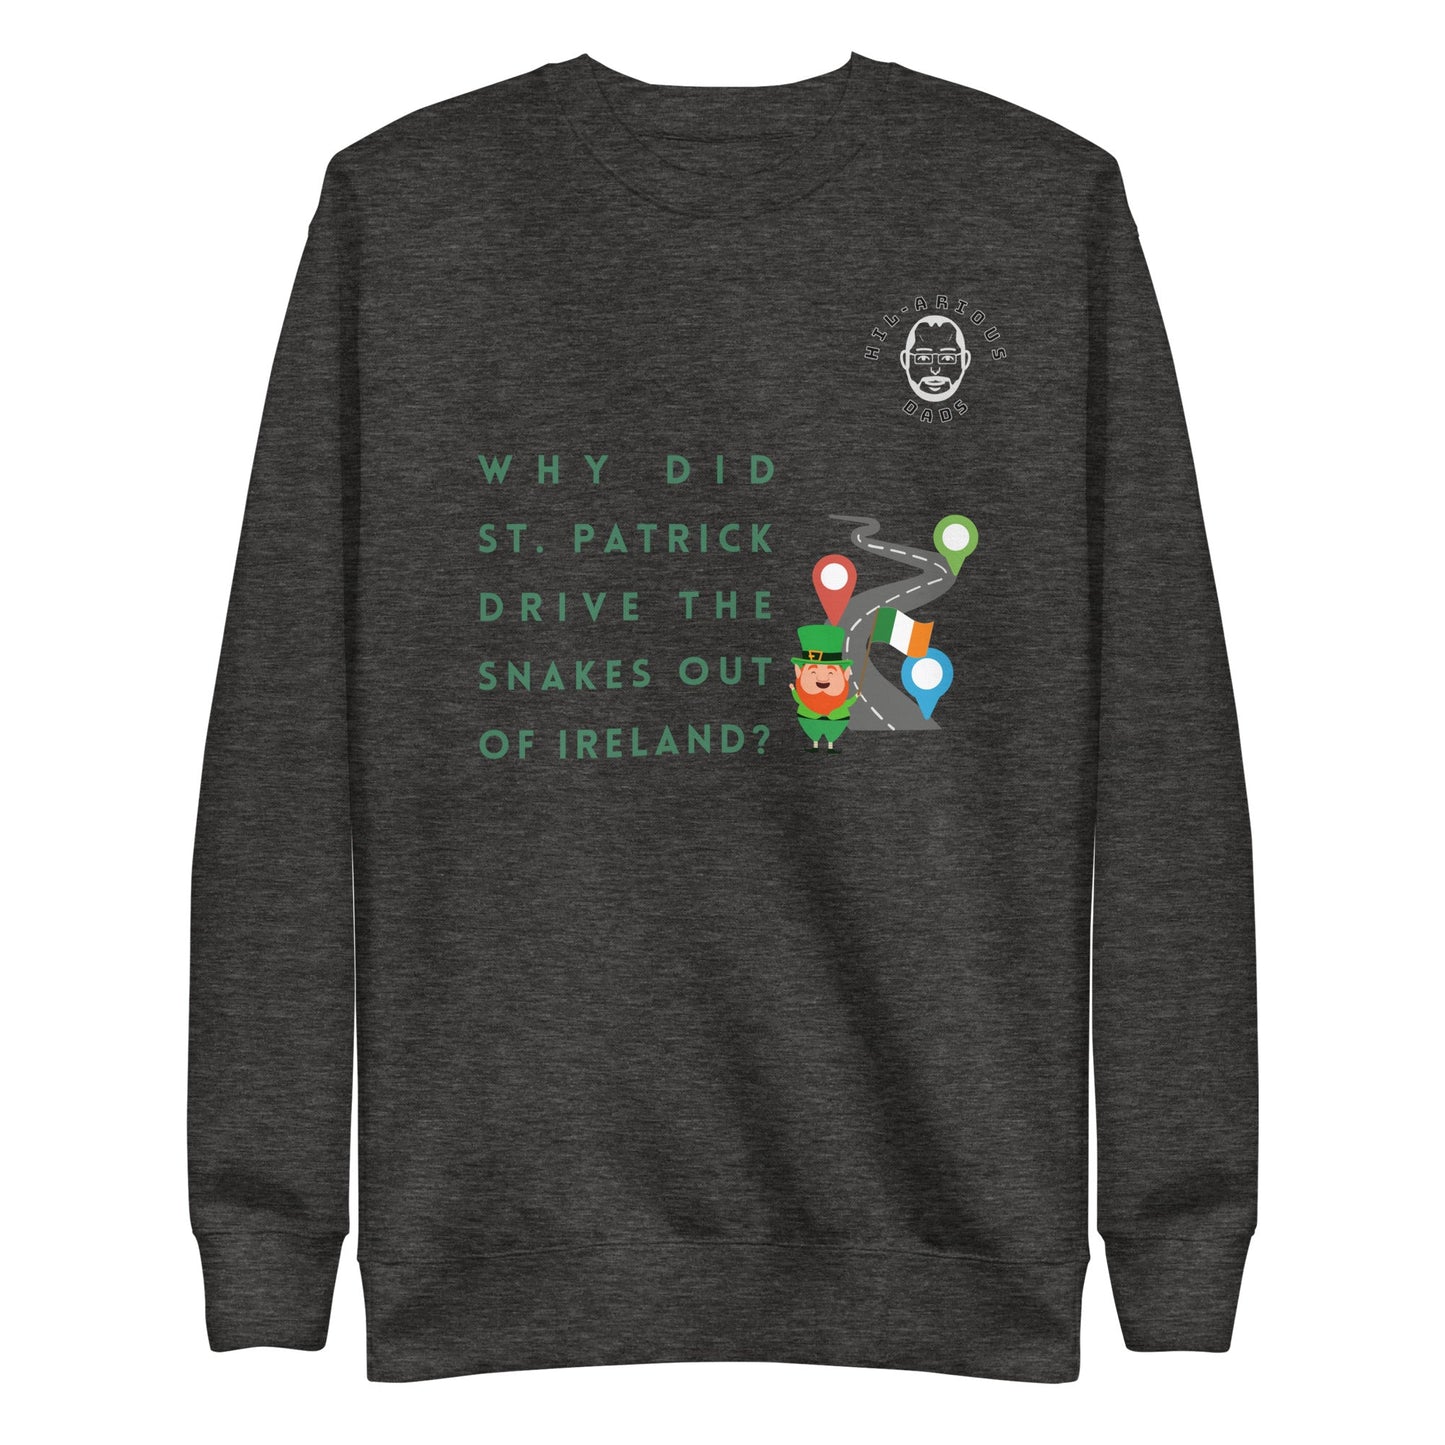 Why did St. Patrick drive the snakes out of Ireland?-Sweatshirt - Hil-arious Dads